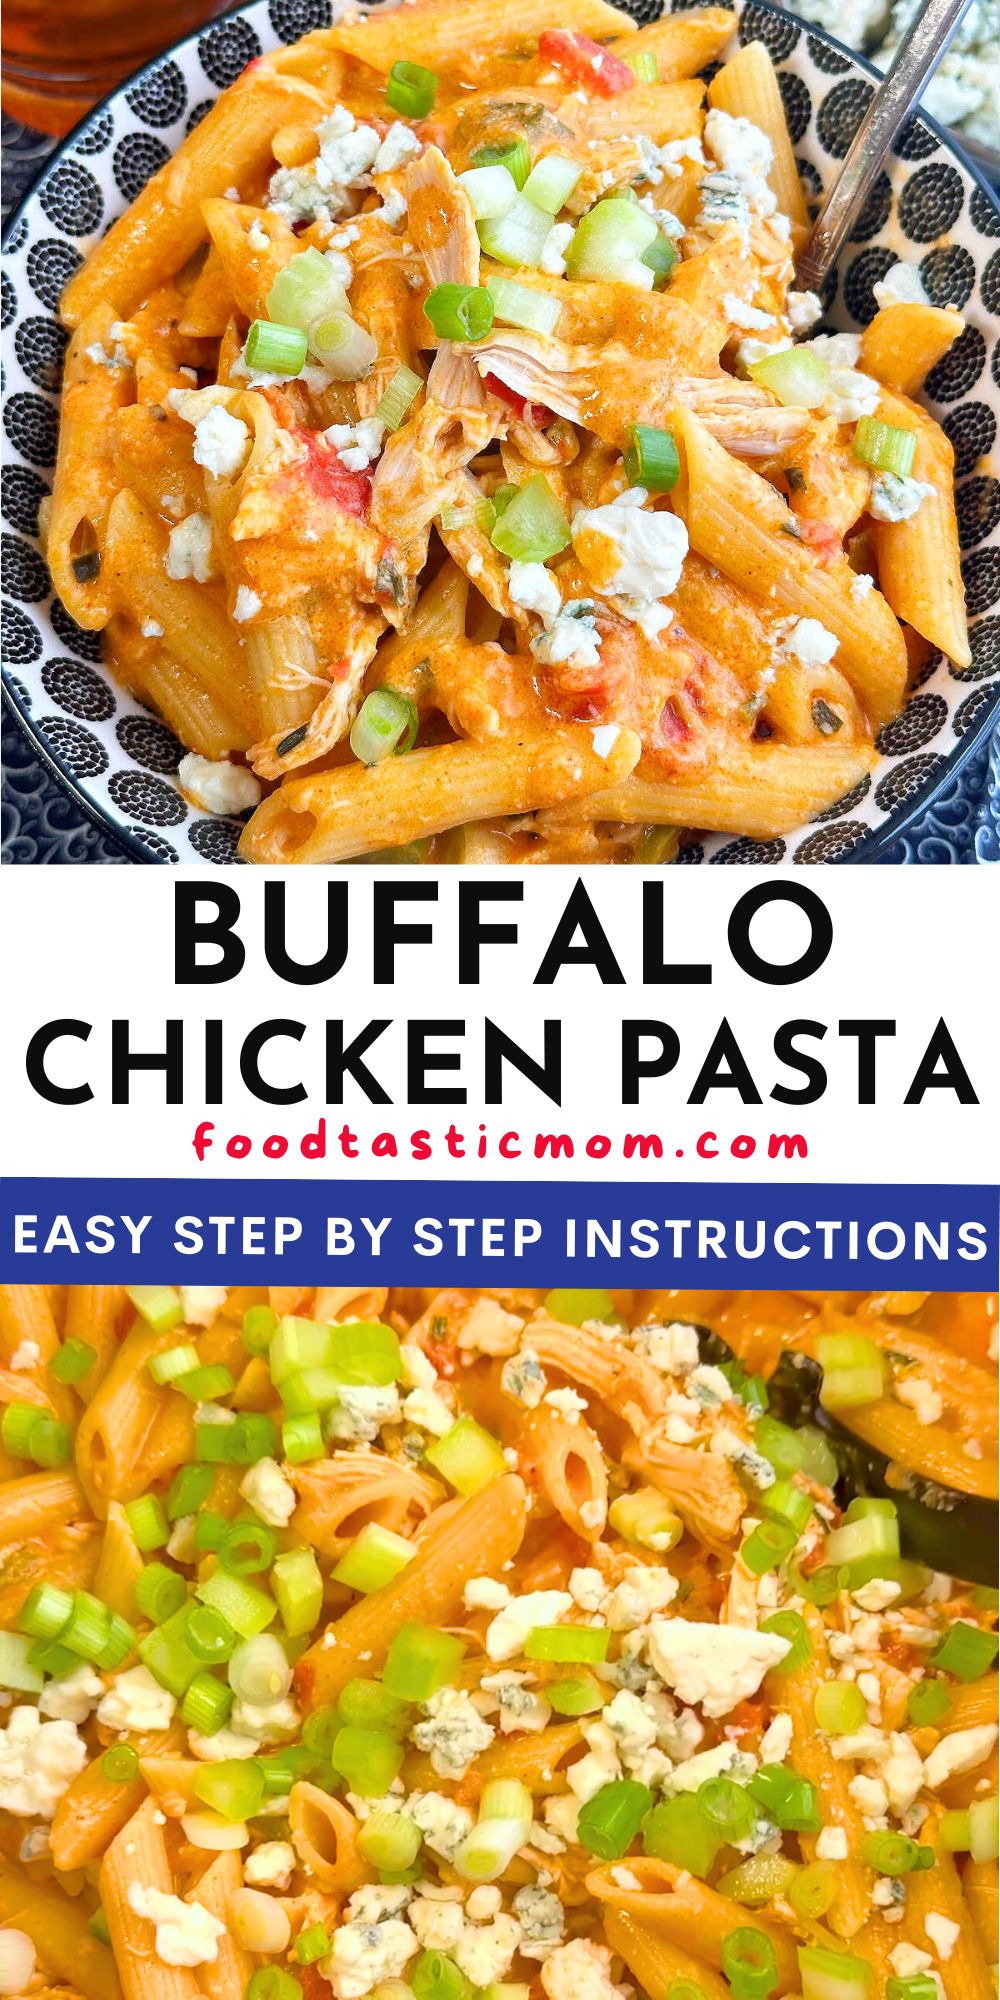 Spice up your weeknight dinner with this delicious and easy one pot buffalo chicken pasta recipe. Made with just a few simple ingredients, this dish is sure to become a family favorite! via @foodtasticmom